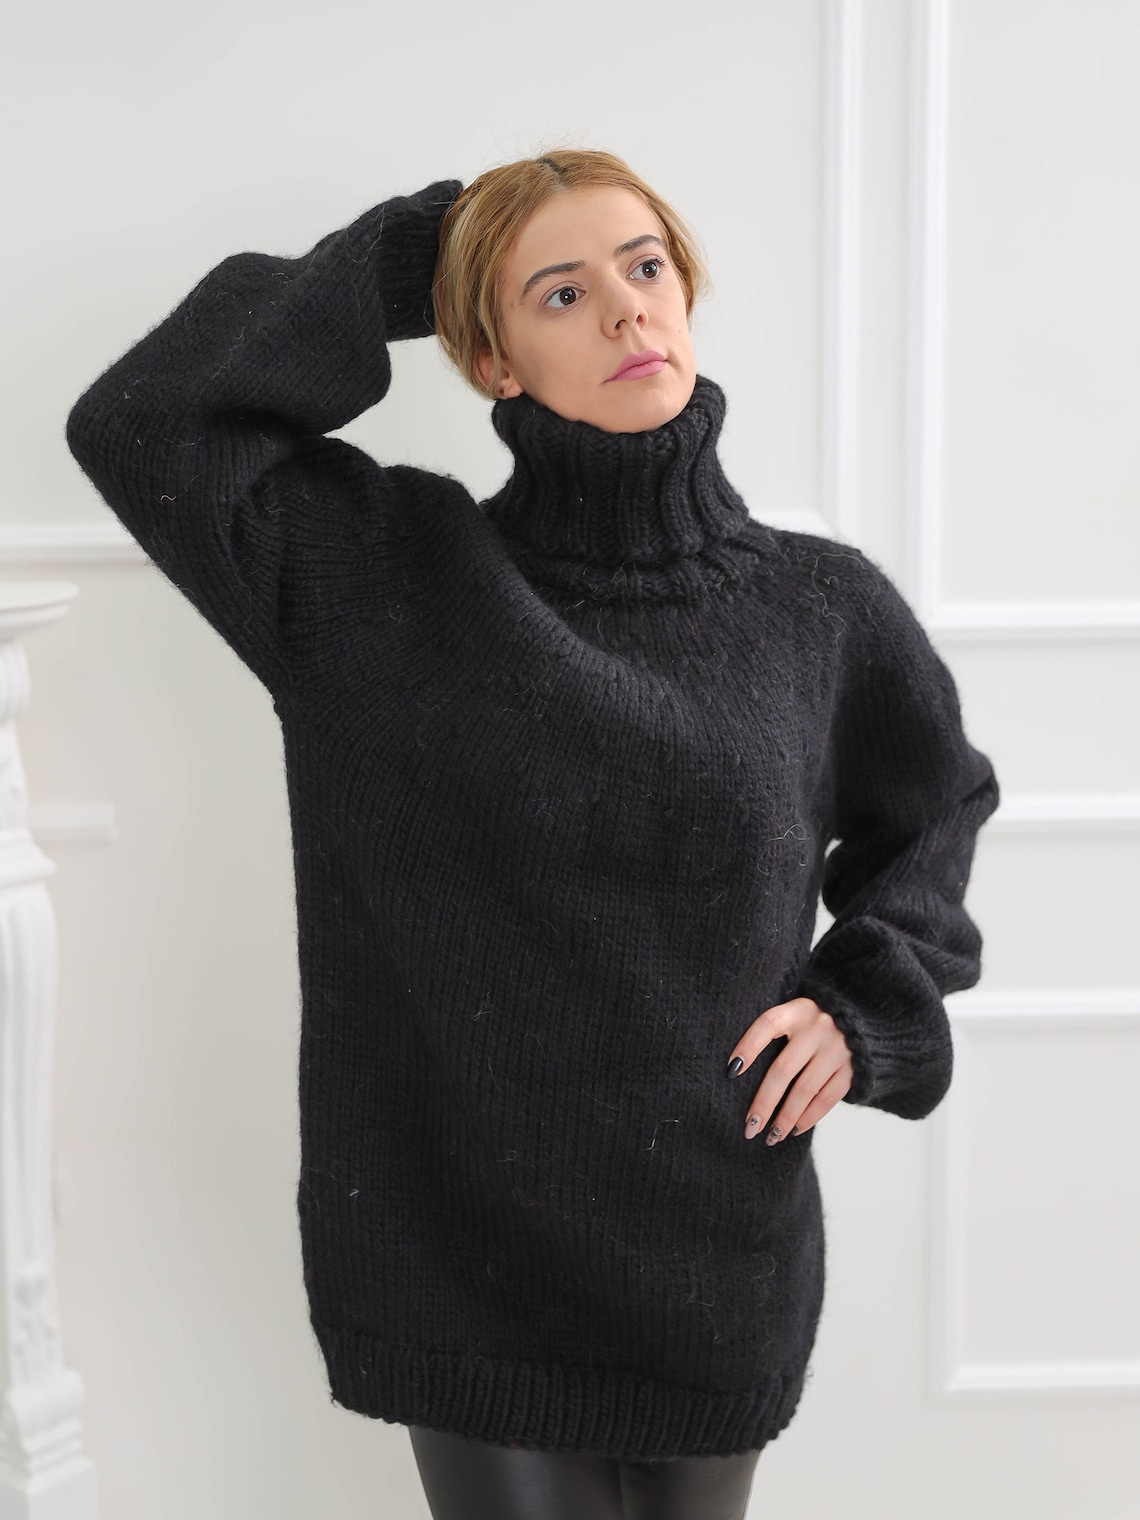 Black Oversize Wool Sweater Chunky Turtleneck Wool Pullover | Etsy